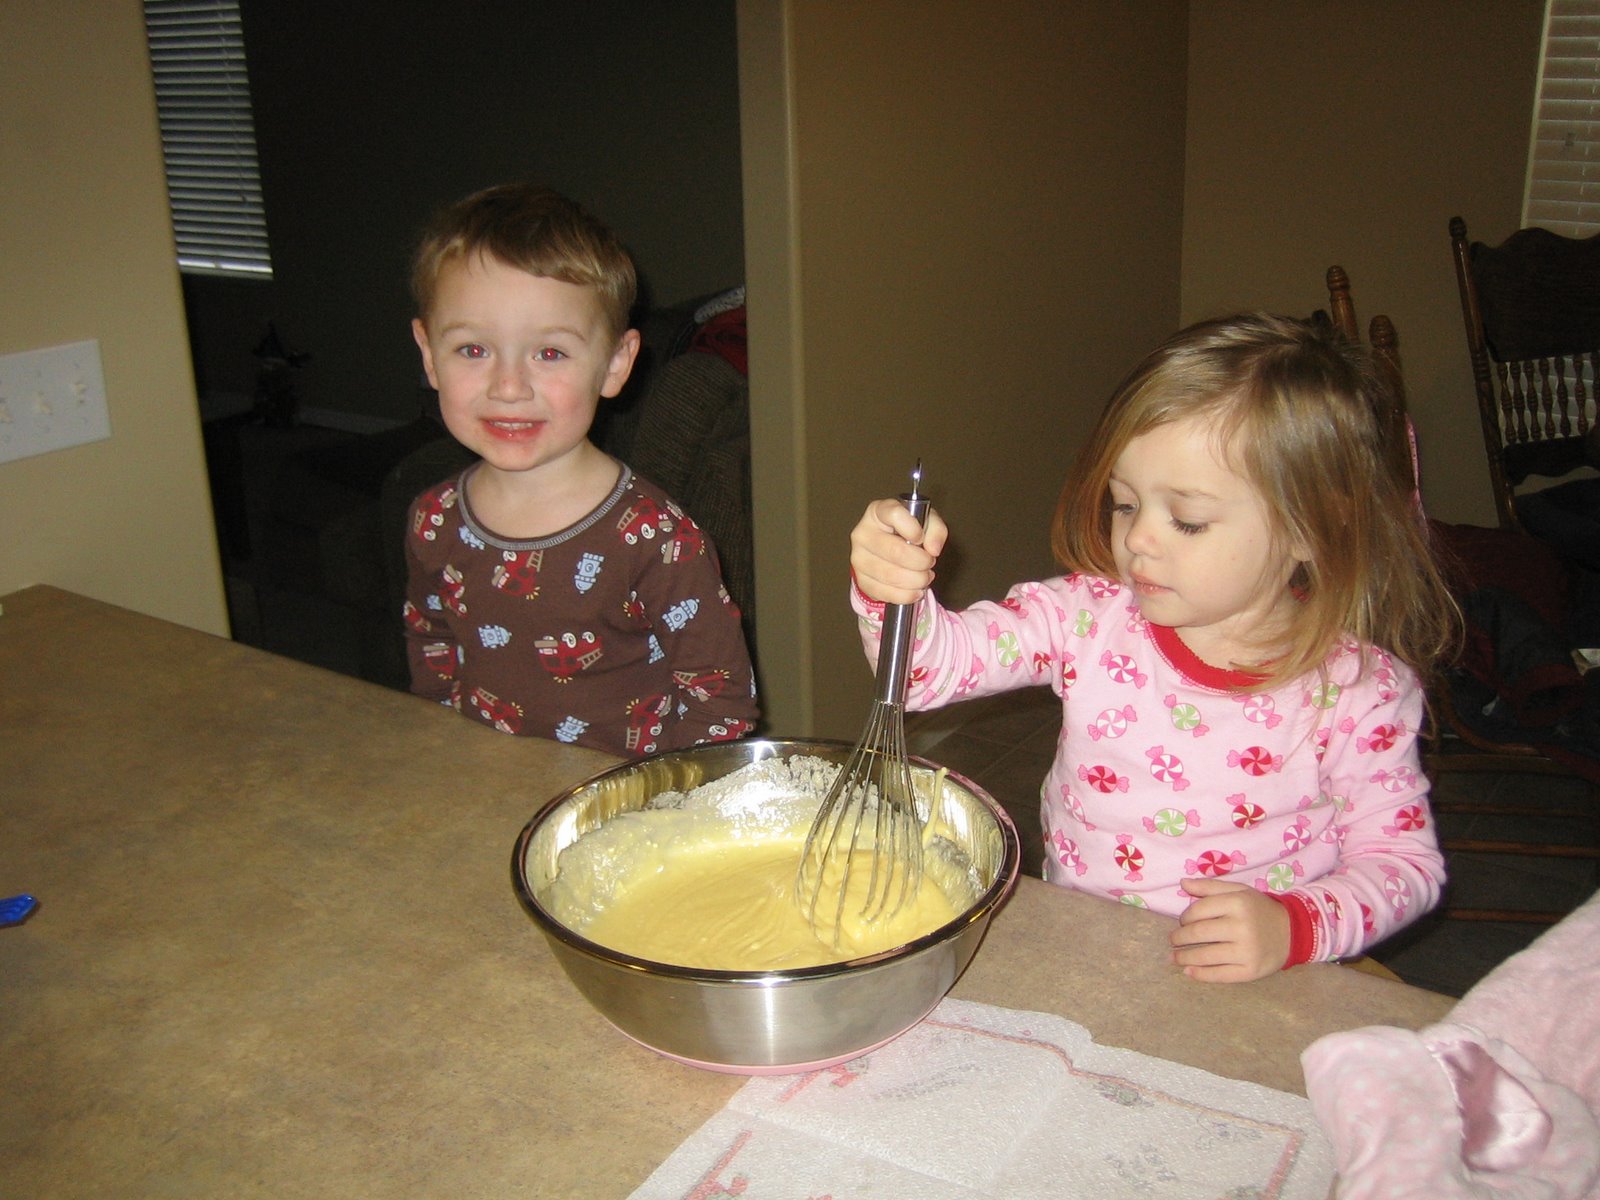 [Making+cupcakes+with+Daddy.JPG]